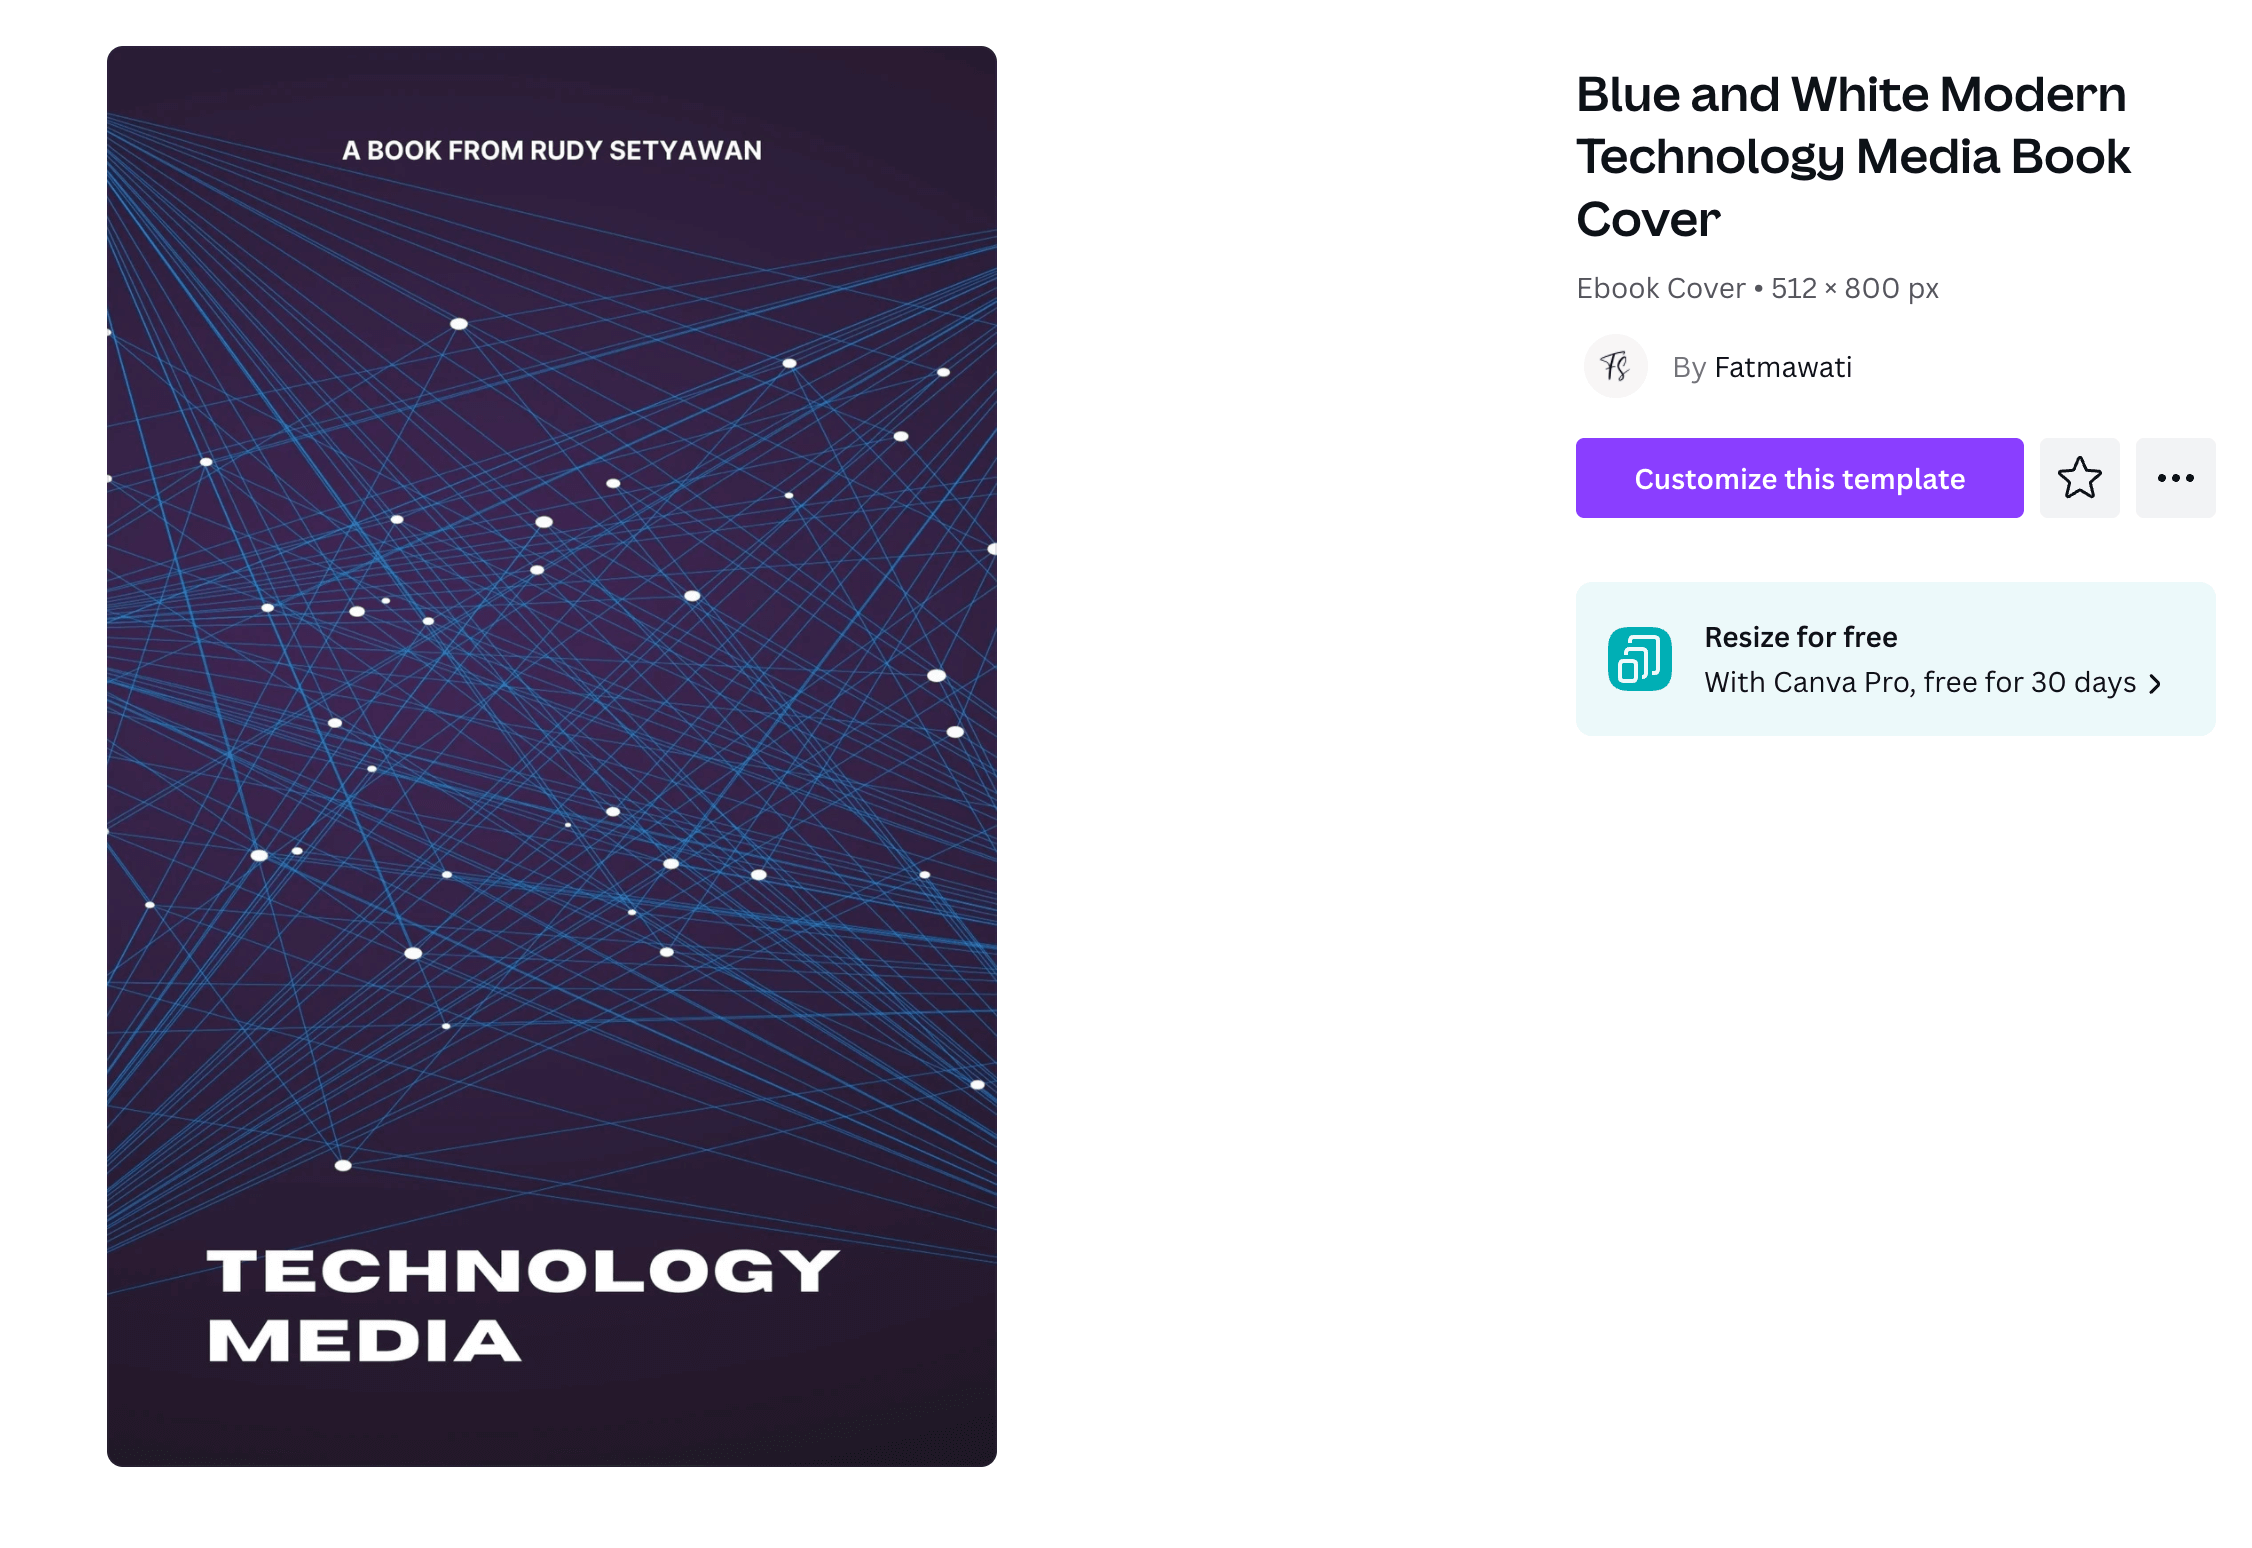 A technology media ebook cover with an abstract blue design